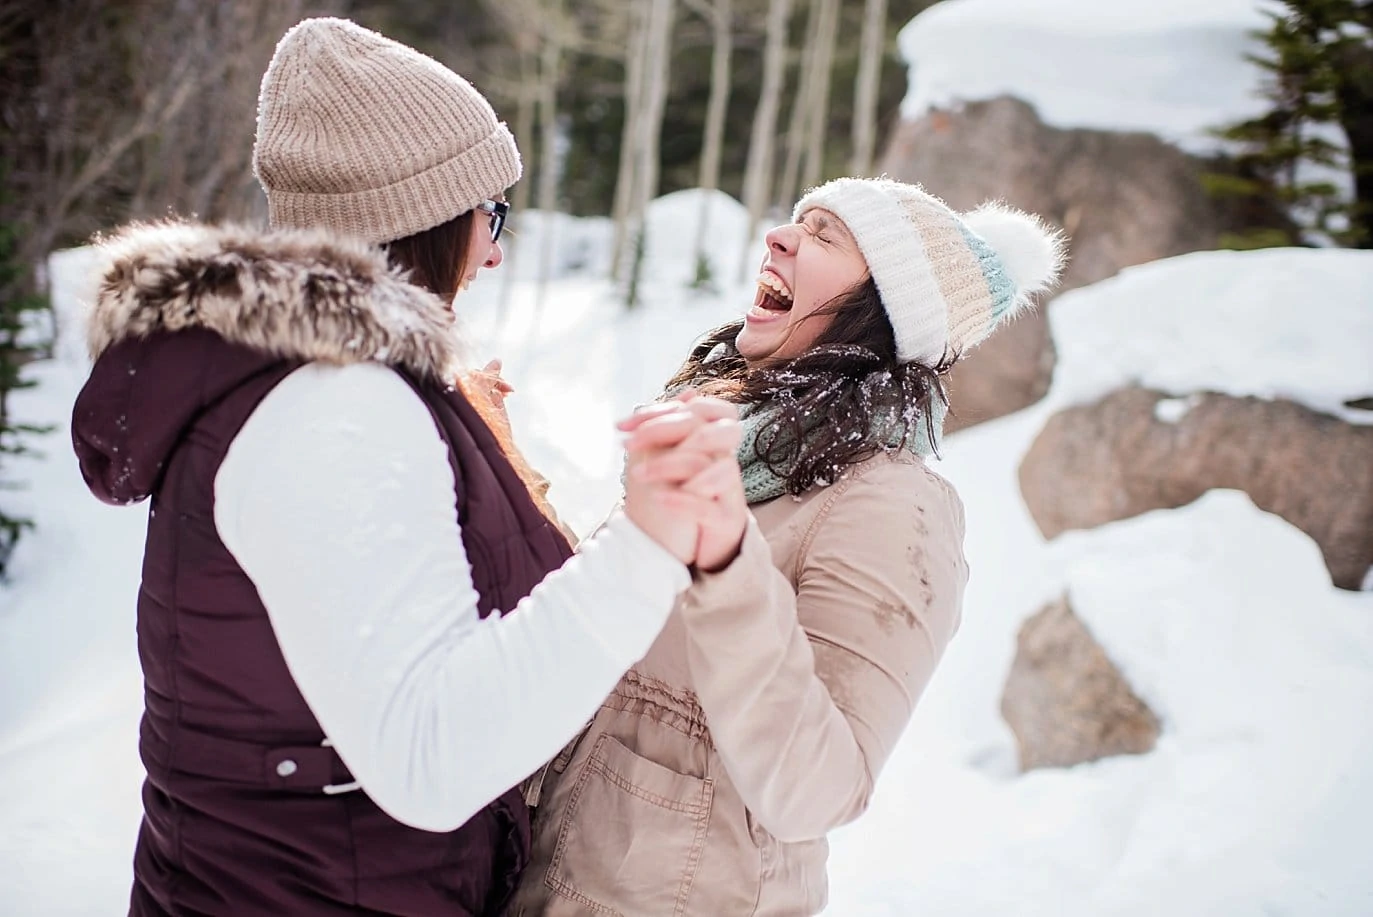 queer couple laughing in snow Alberta Falls Rocky Mountain National Park winter hiking engagement by Denver engagement photographer Jennie Crate, Photographer